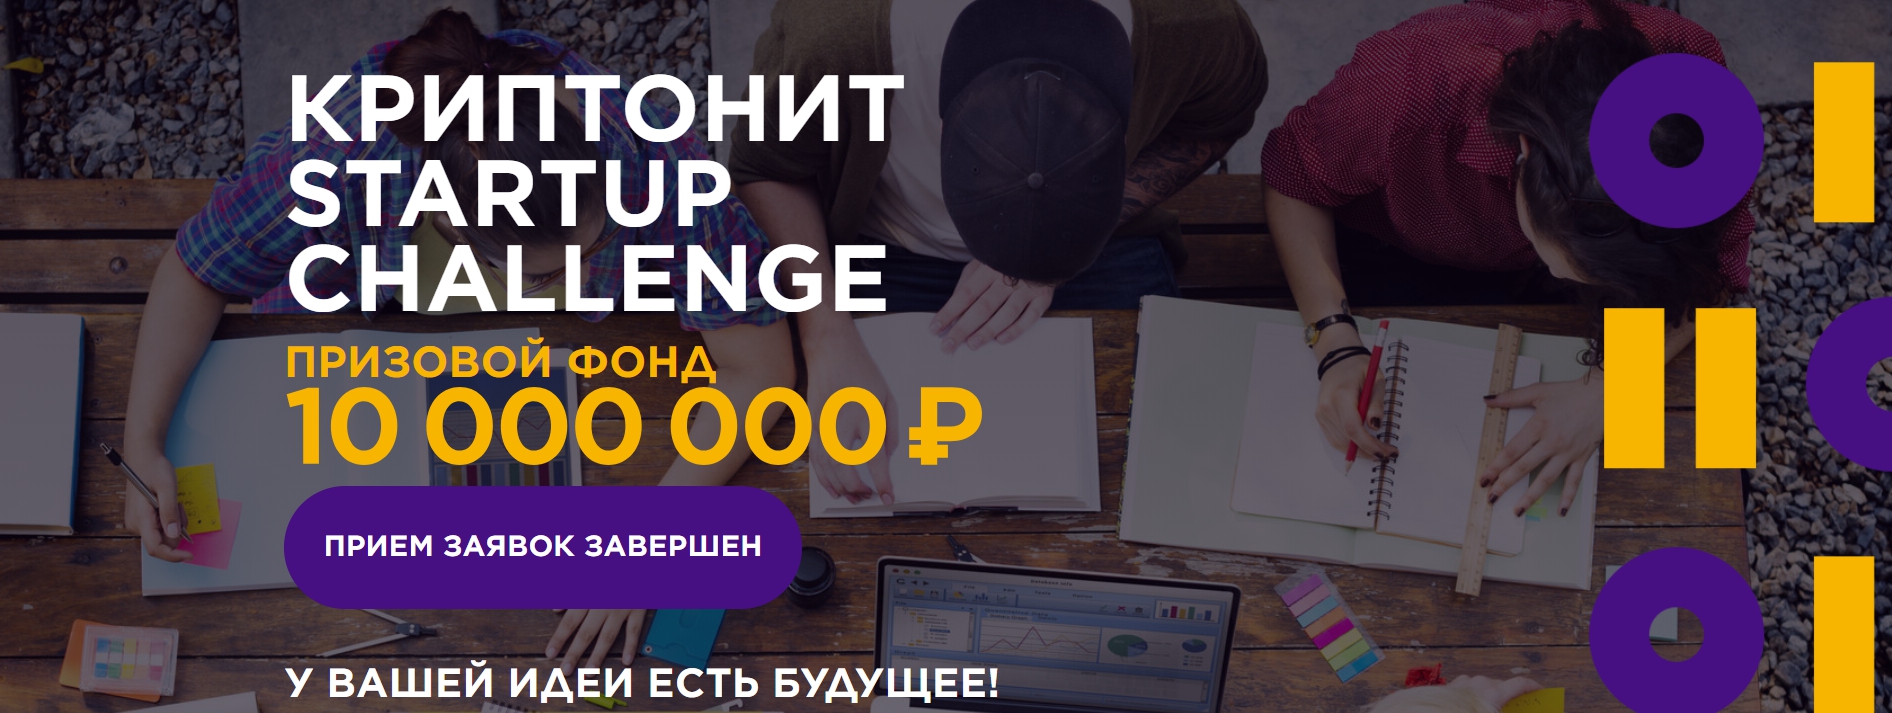 ViewApp project takes part in the Cryptonite Startup Challenge